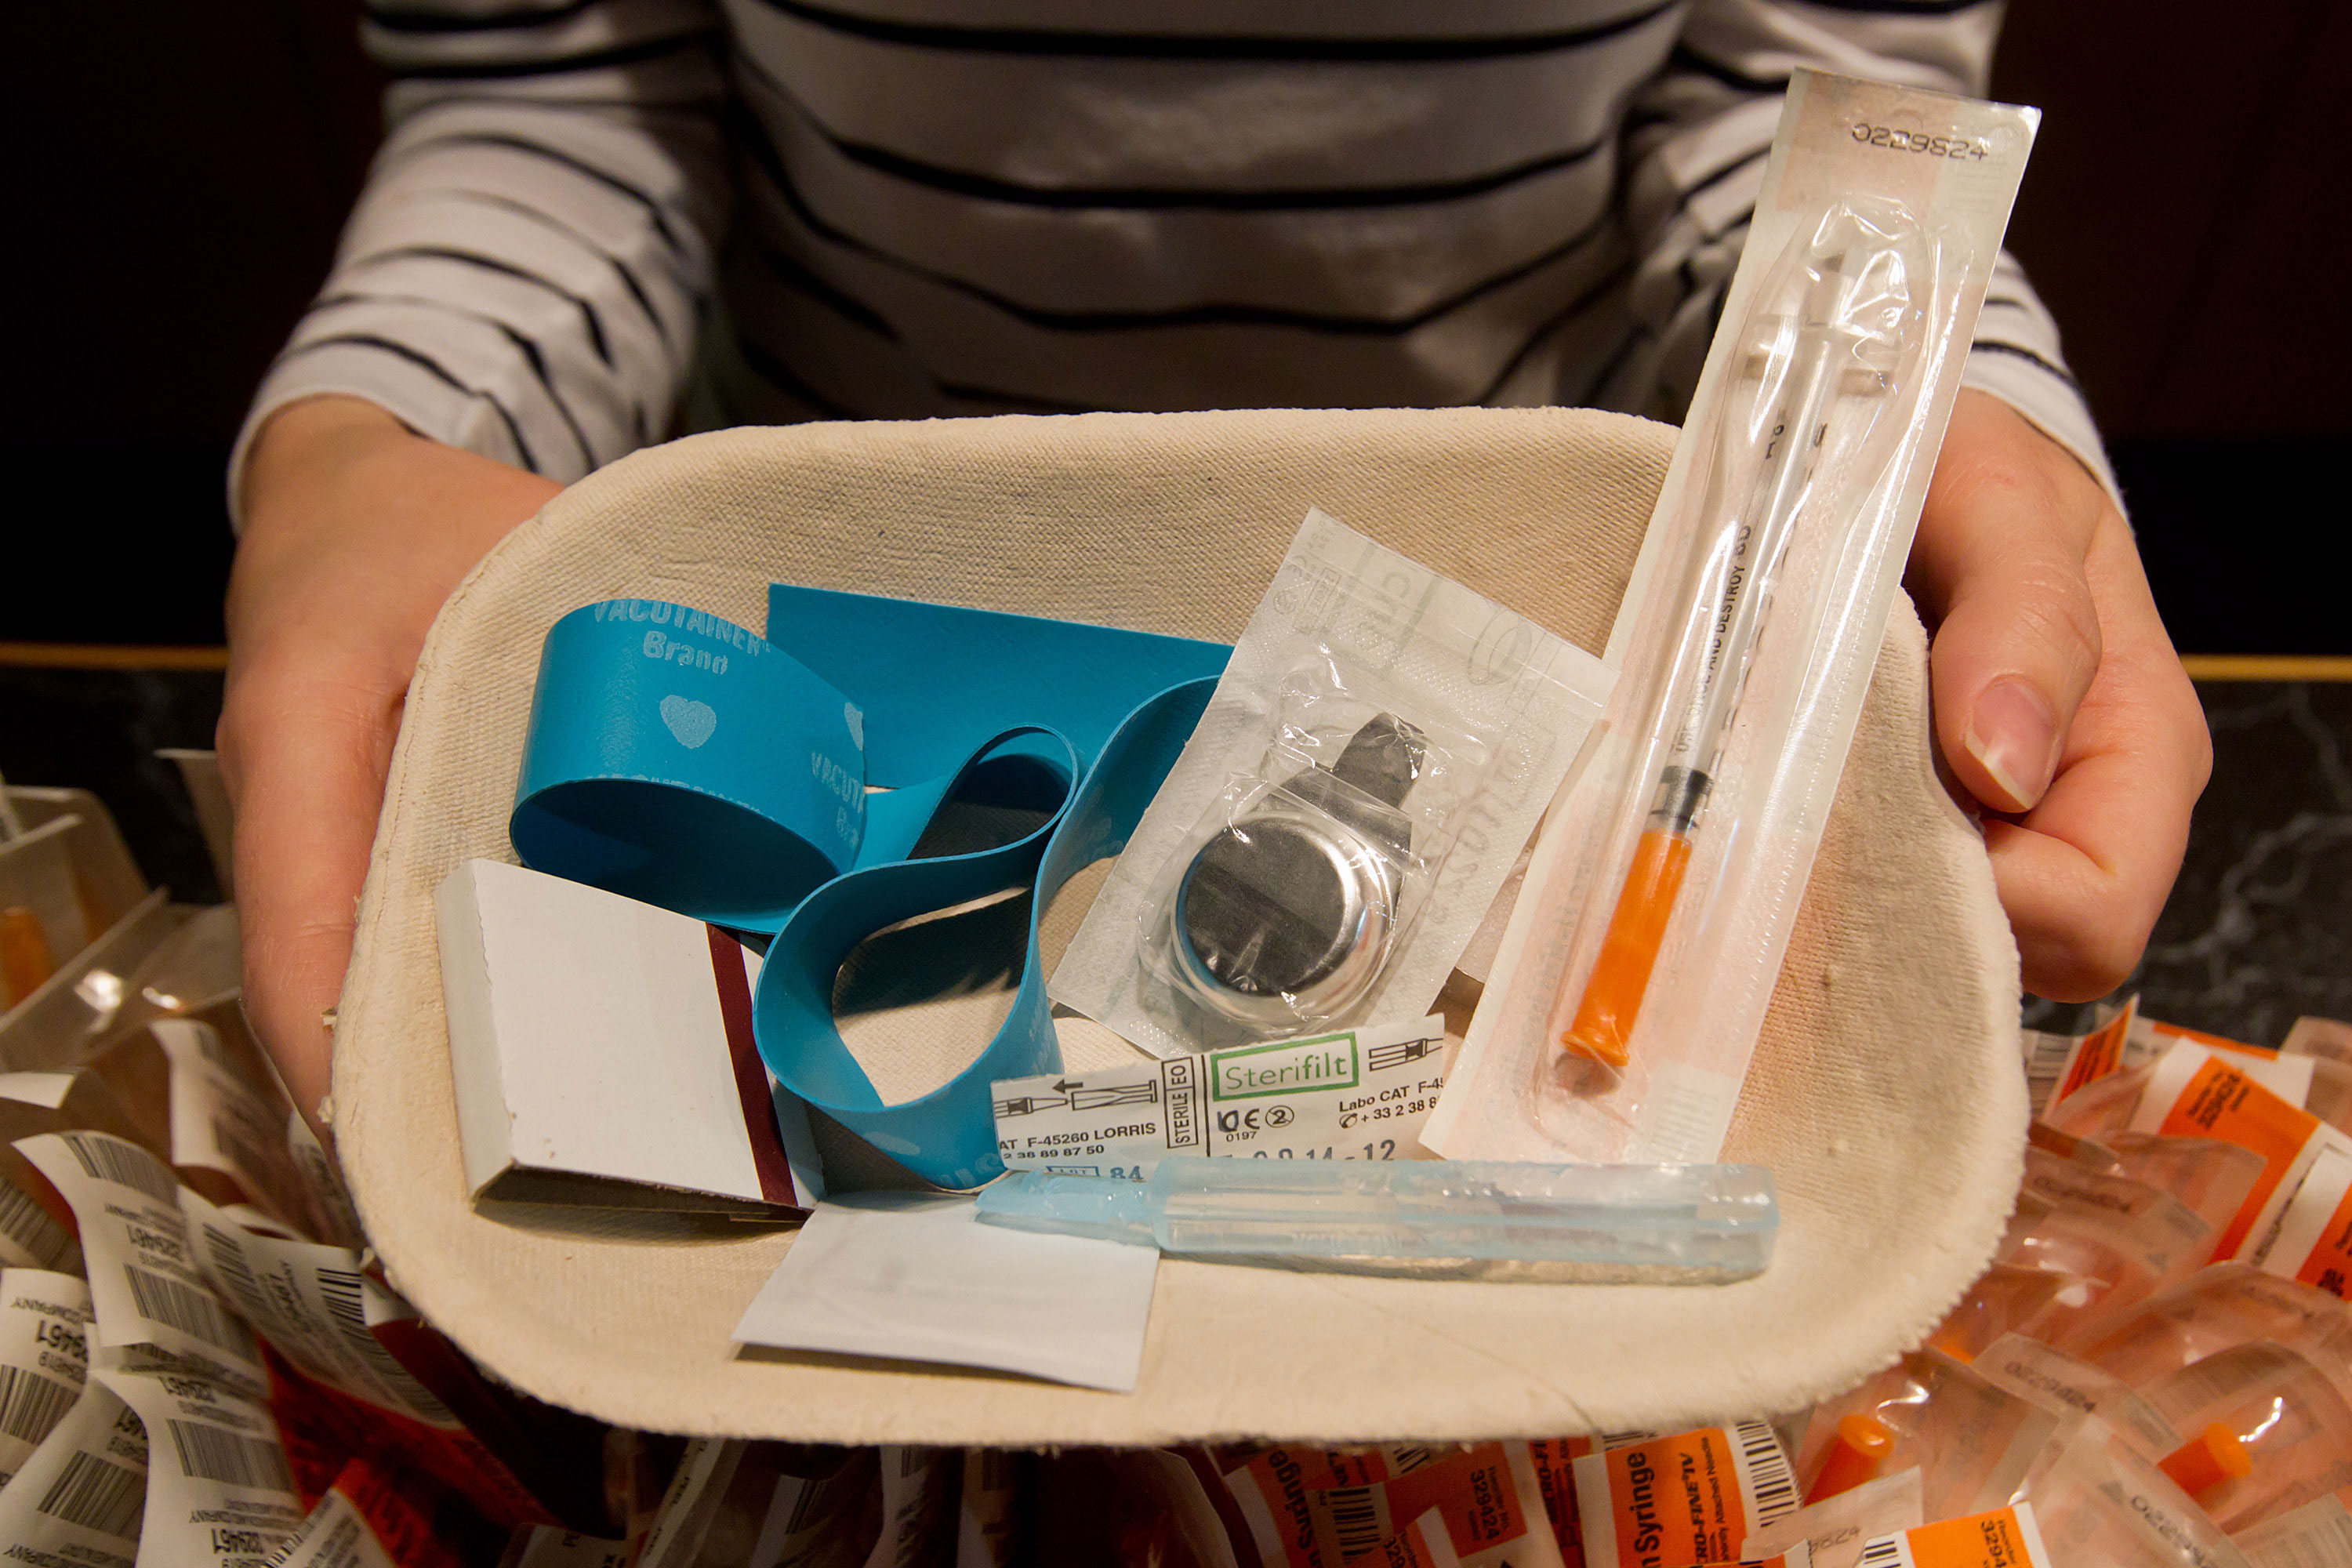 Registered nurse Sammy Mullally holds a tray of supplies to be used by a drug addict at the Insite safe injection clinic in Vancouver, B.C., May 11, 2011.